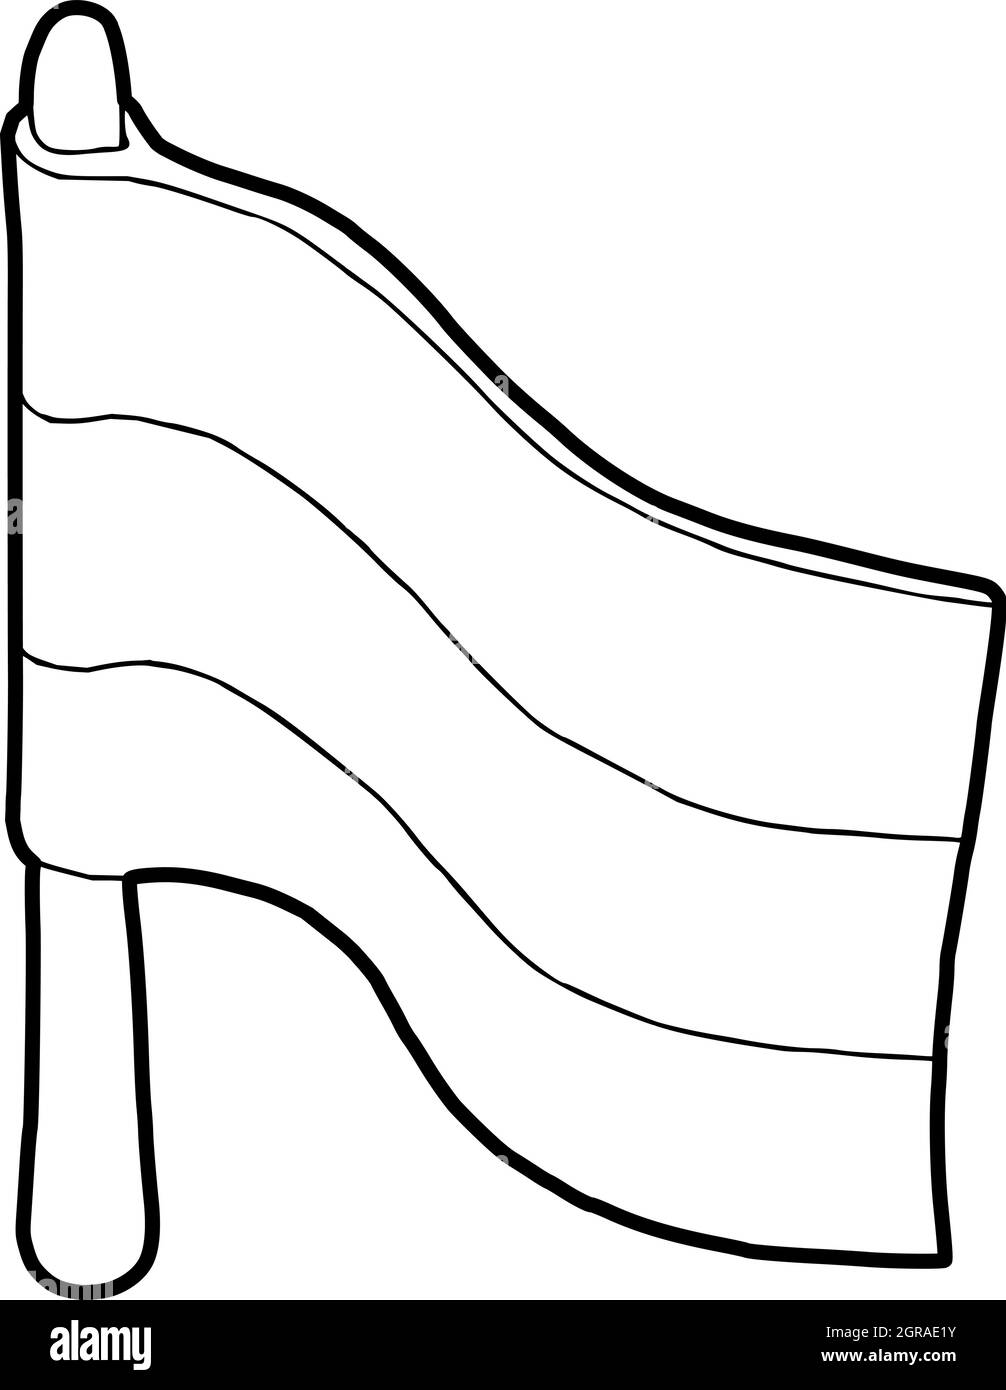 Flag icon in outline style Stock Vector